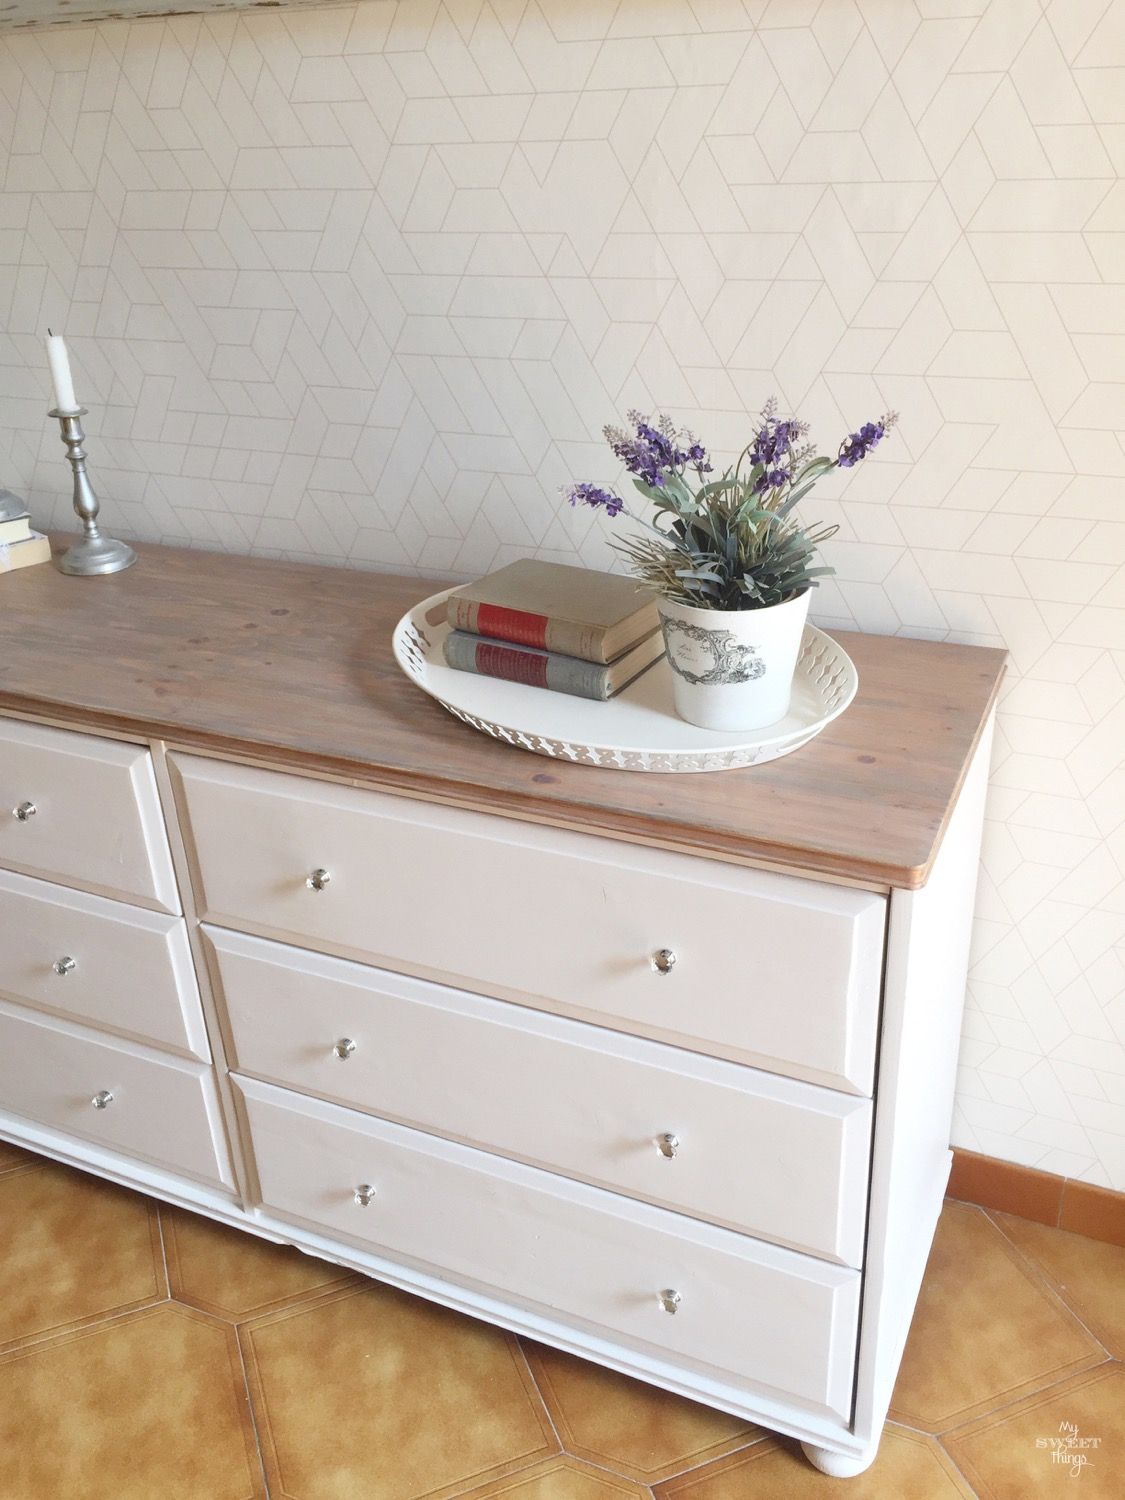 Two toned sideboard makeover · Walnut and off white · Via www.sweethings.net #two-tone #dresser #sideboard #makeover #furniture